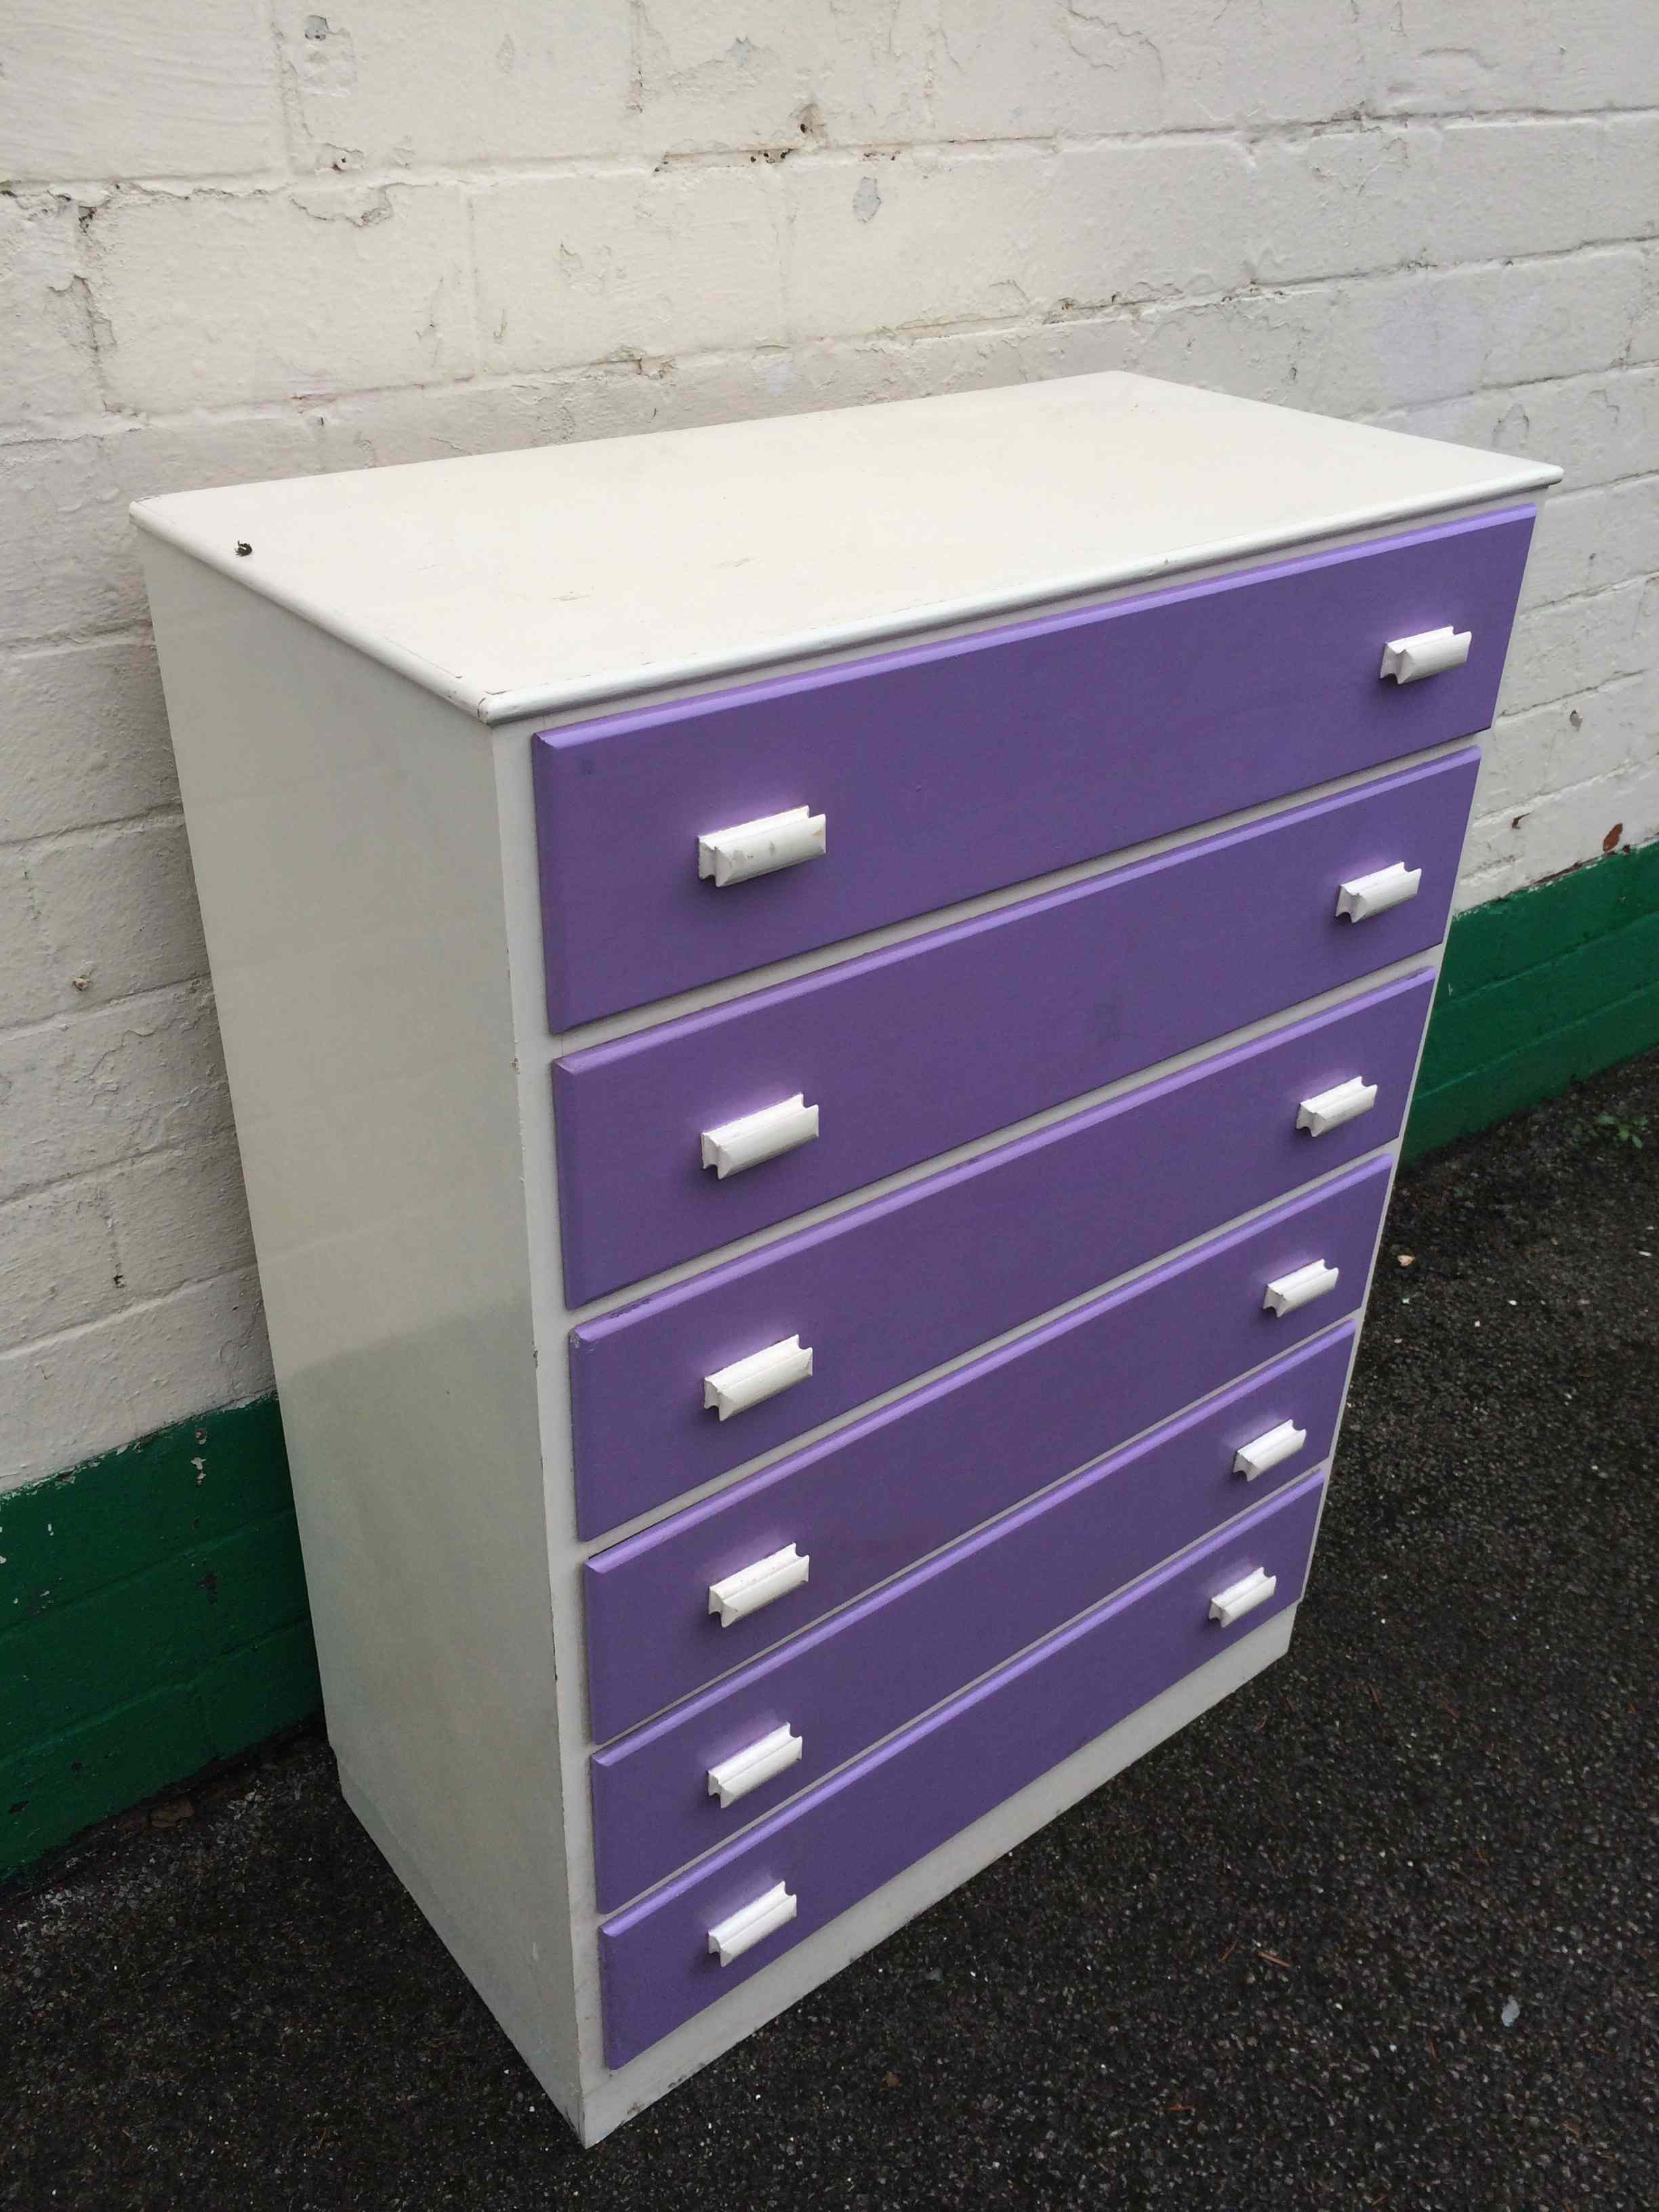 Set of painted purple and white upcycled drawers in the shabby, vintage chic style.